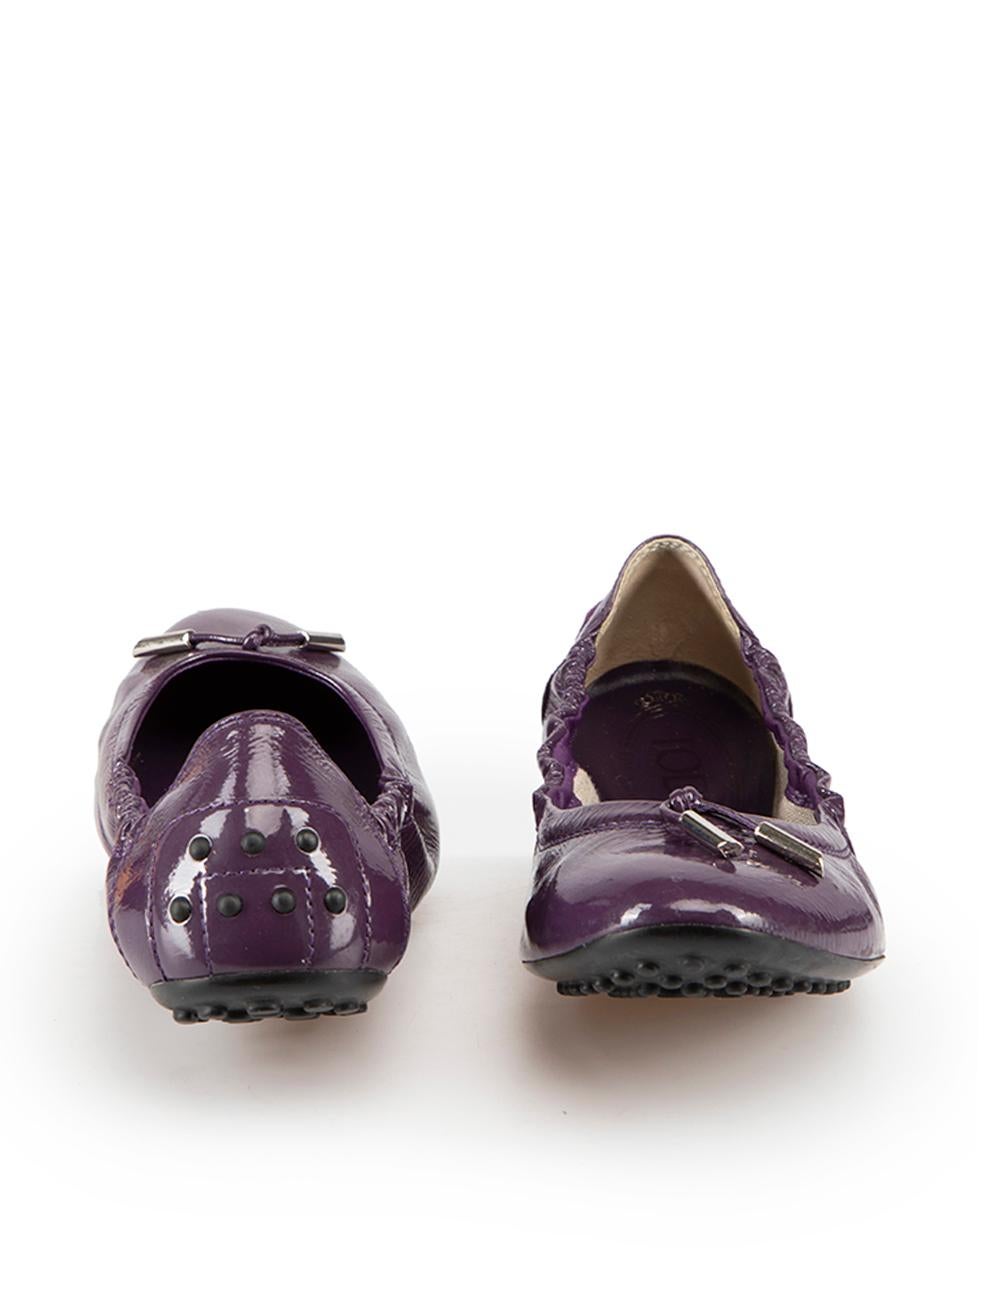 Tod's Purple Patent Leather Driving Shoes Size IT 37.5 In Good Condition For Sale In London, GB